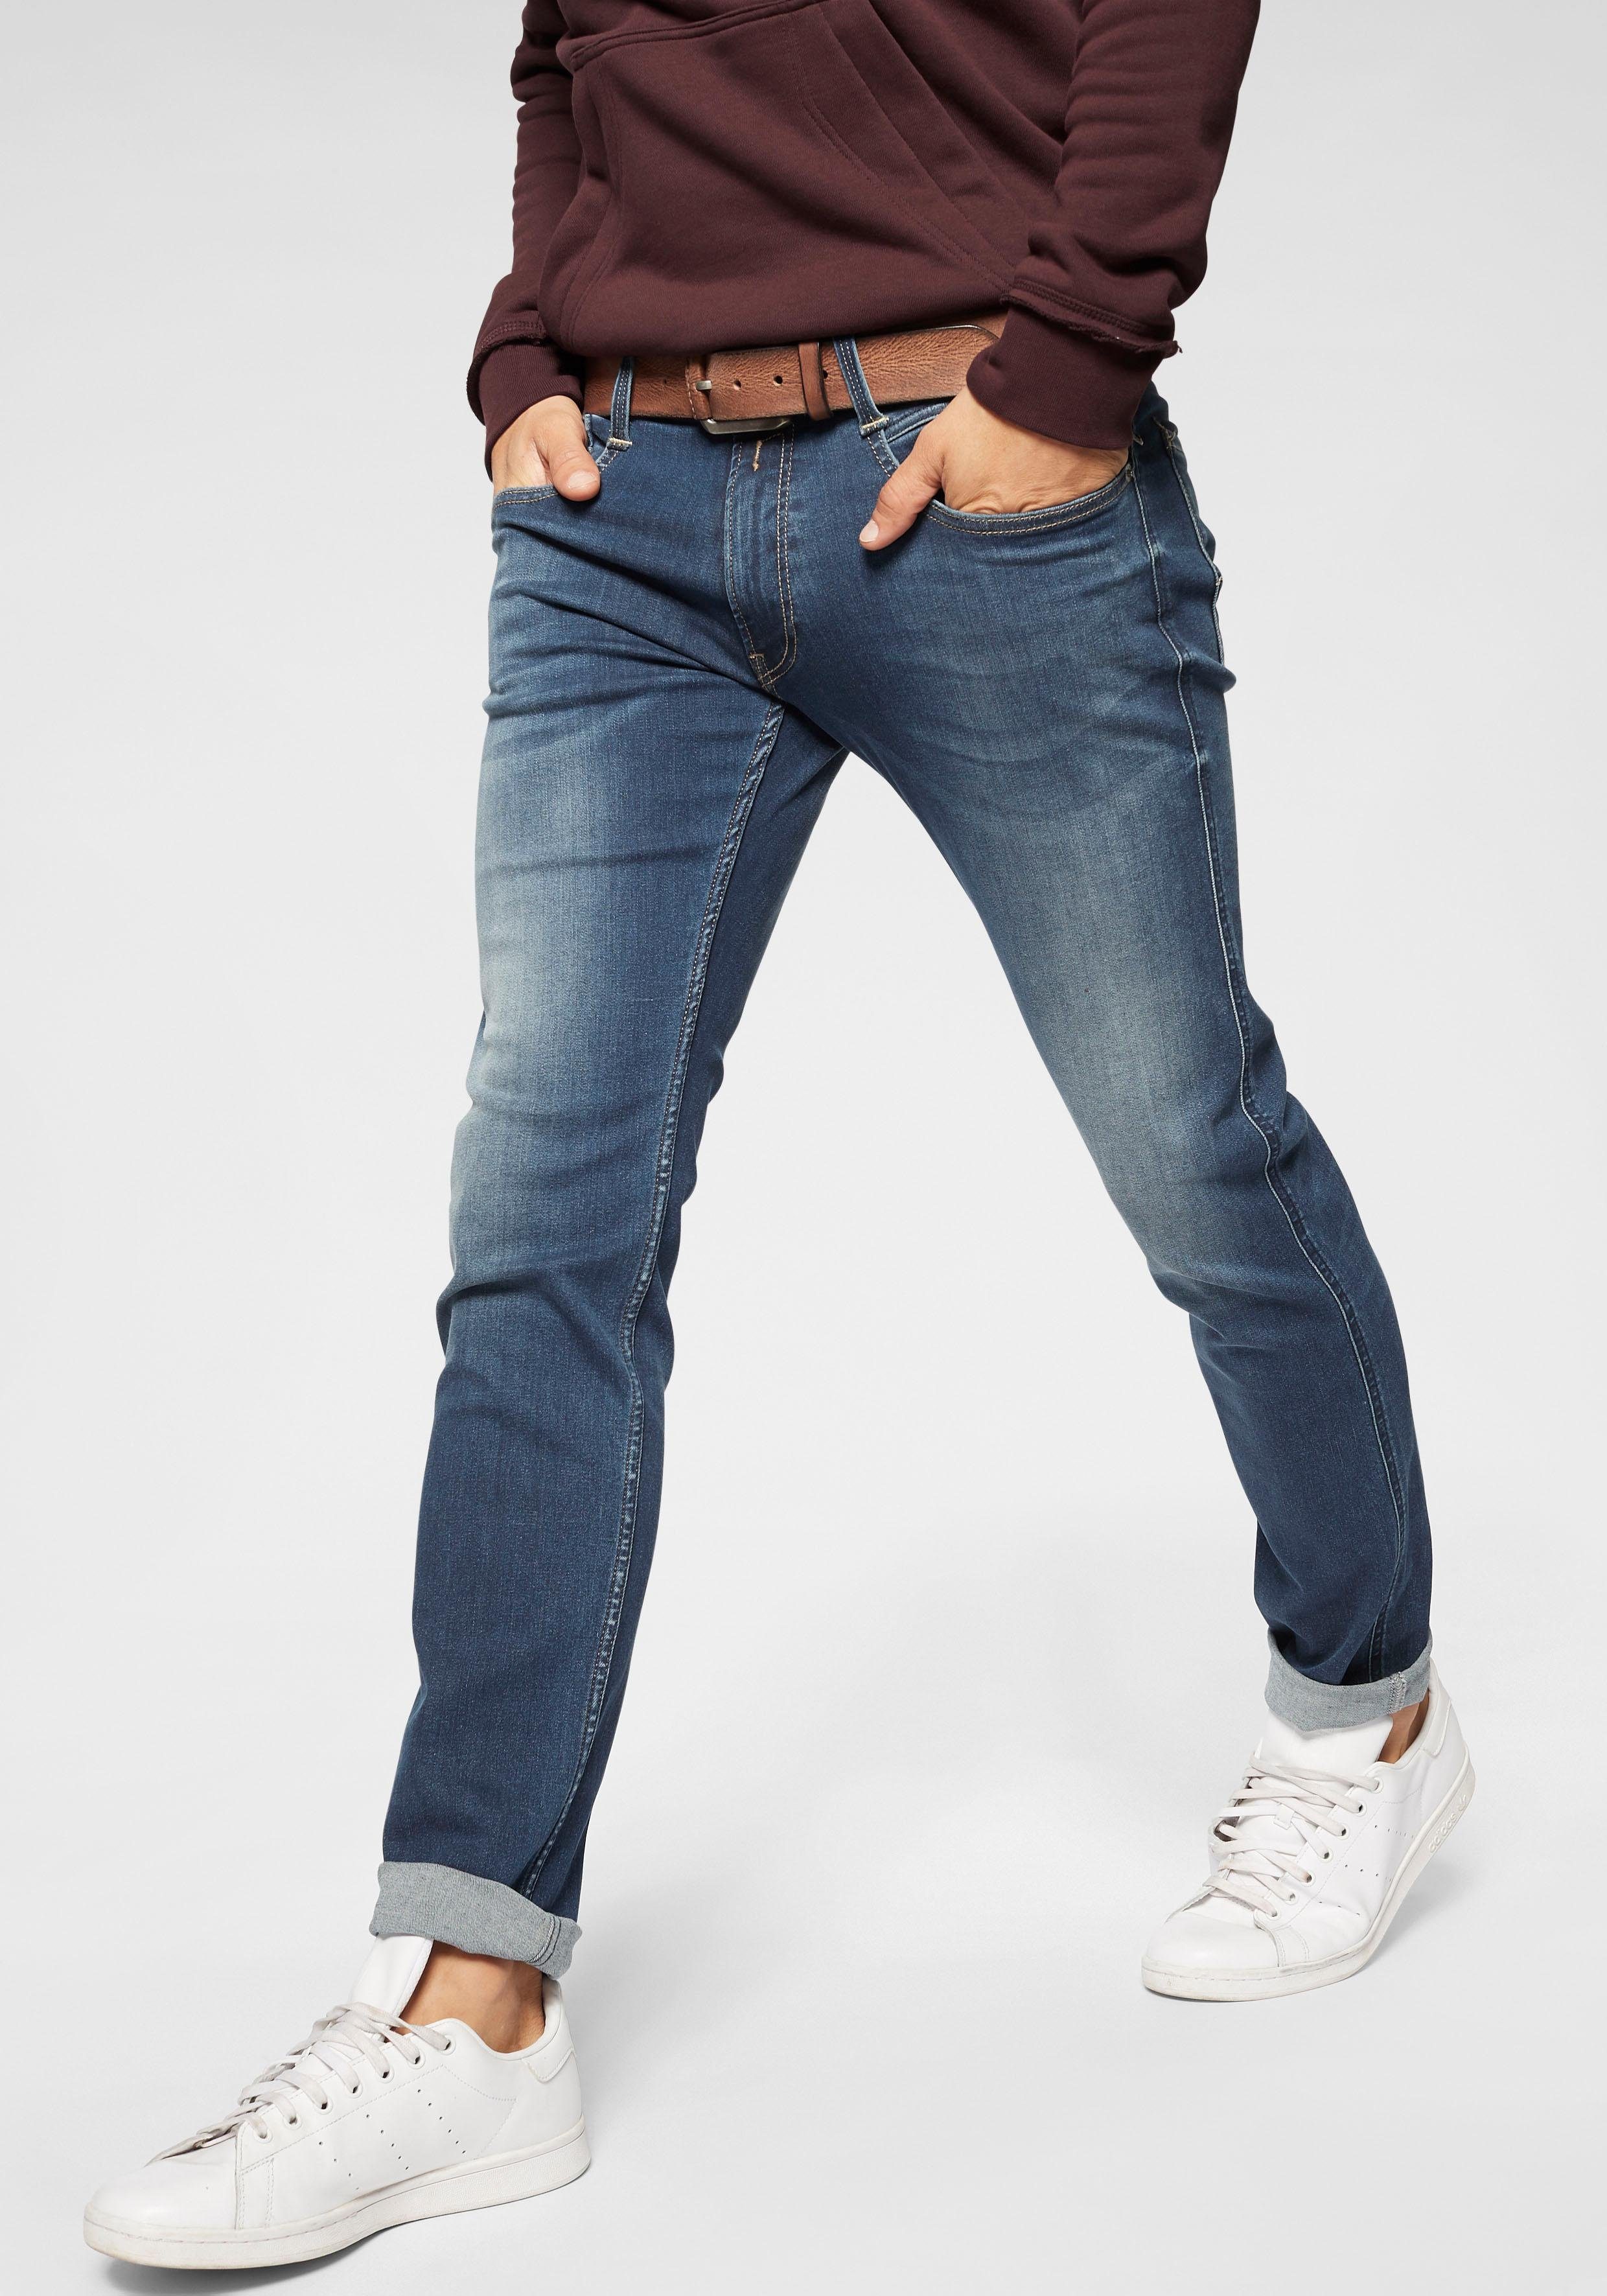 Replay Slim-fit-Jeans »Anbass Superstretch« kaufen | OTTO